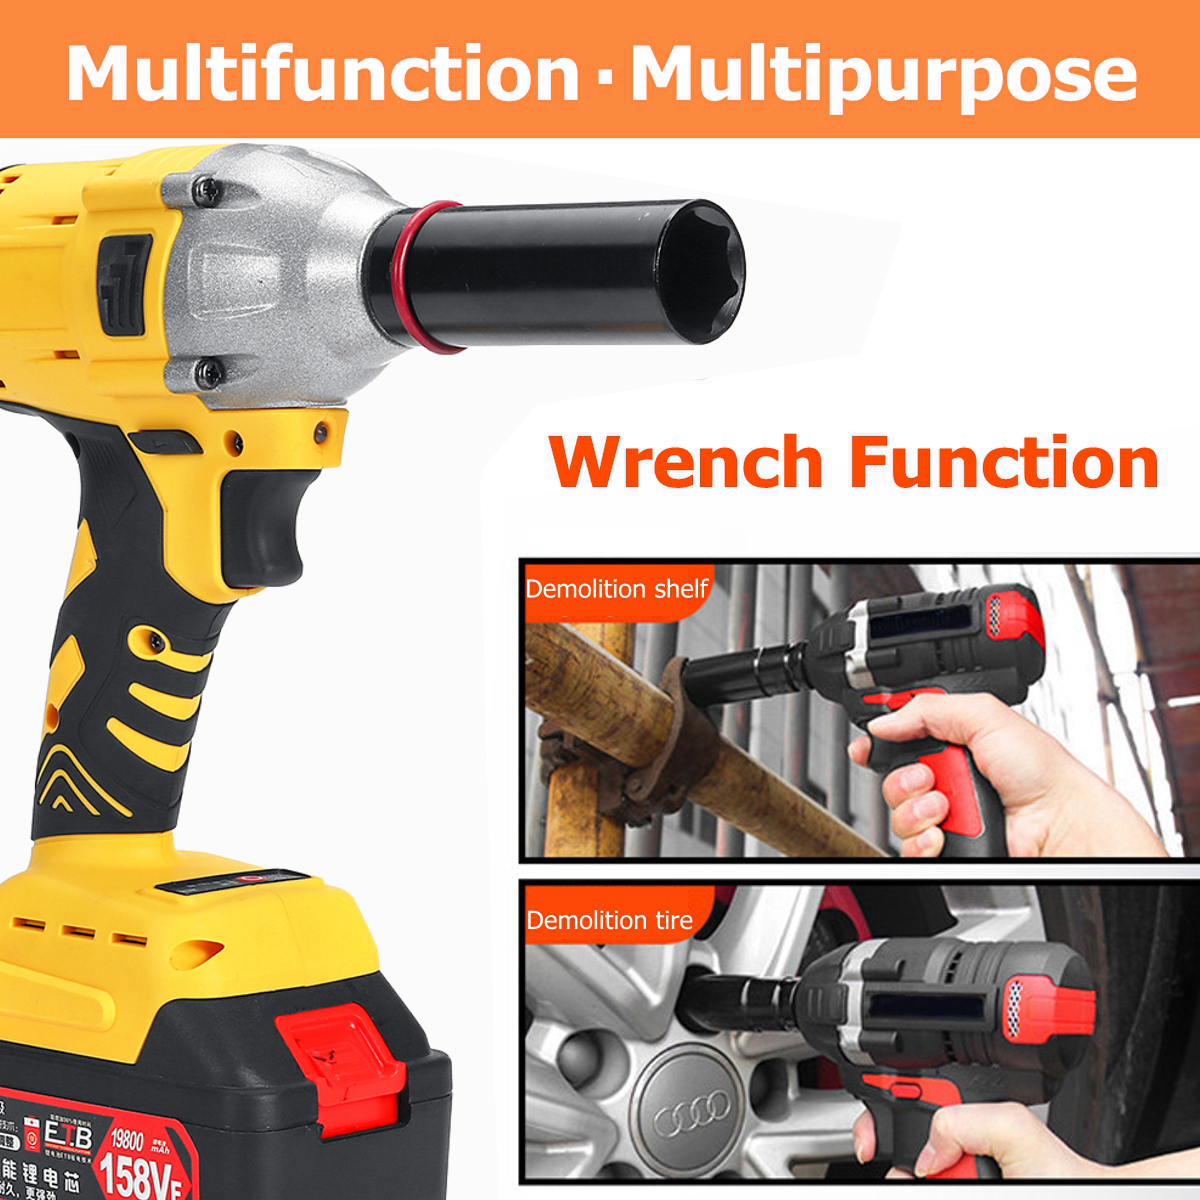 158VF-19800mAh-Cordless-Brushless-Impact-Wrench-Power-Driver-Electric-Wrench-Socket-Battery-Hand-Dri-1545779-4